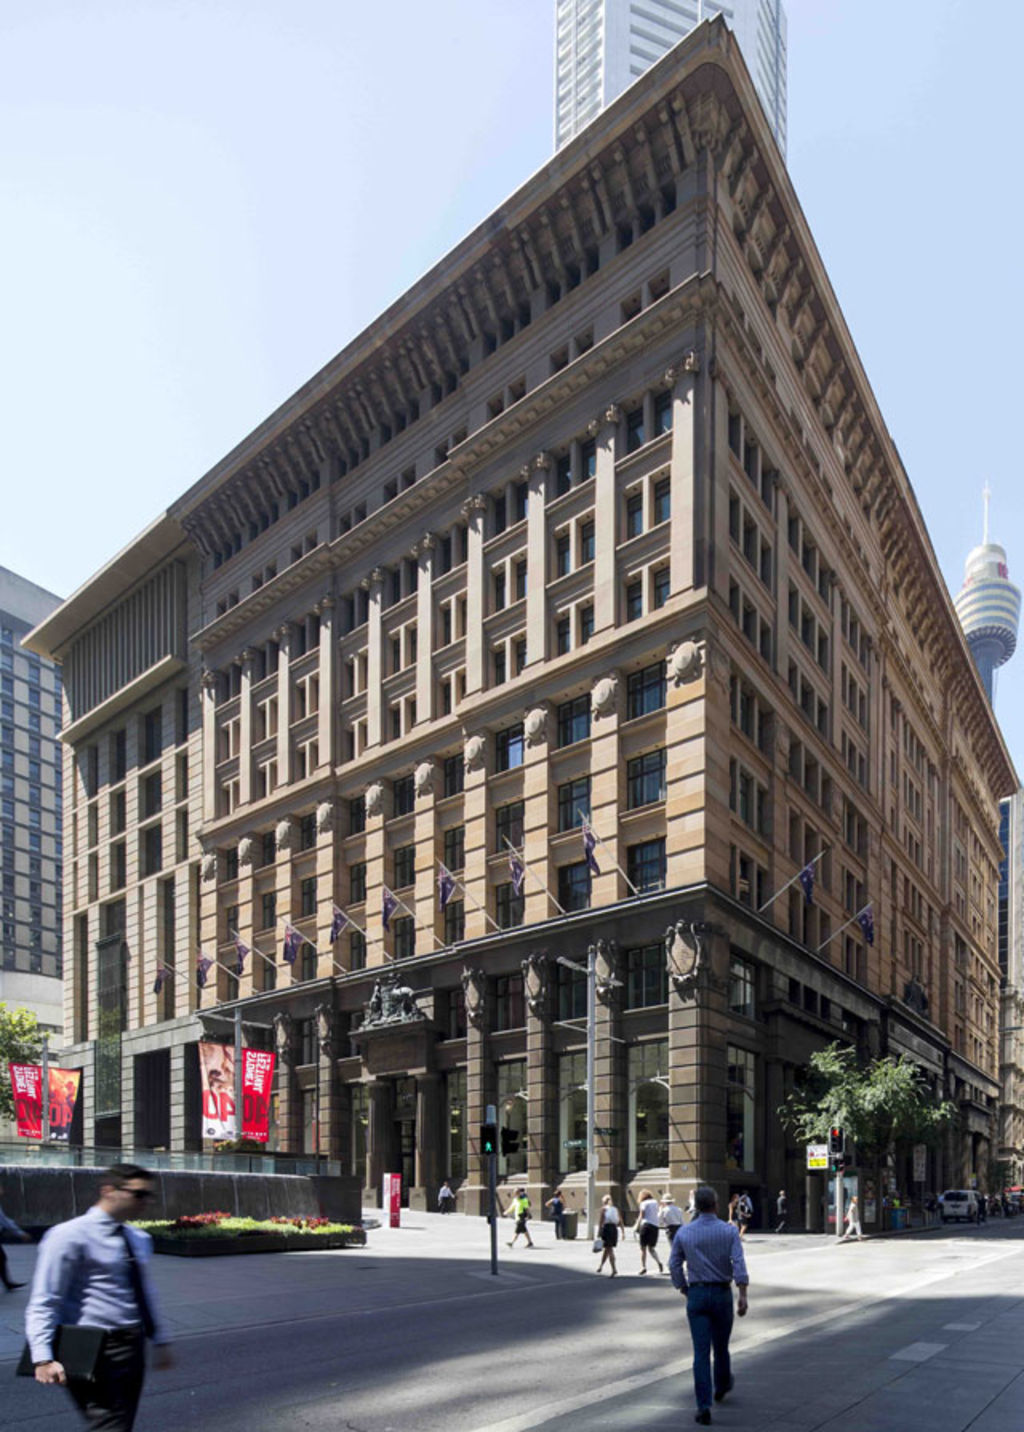 5 Martin Place 'Money Box' earns winning interest from architects